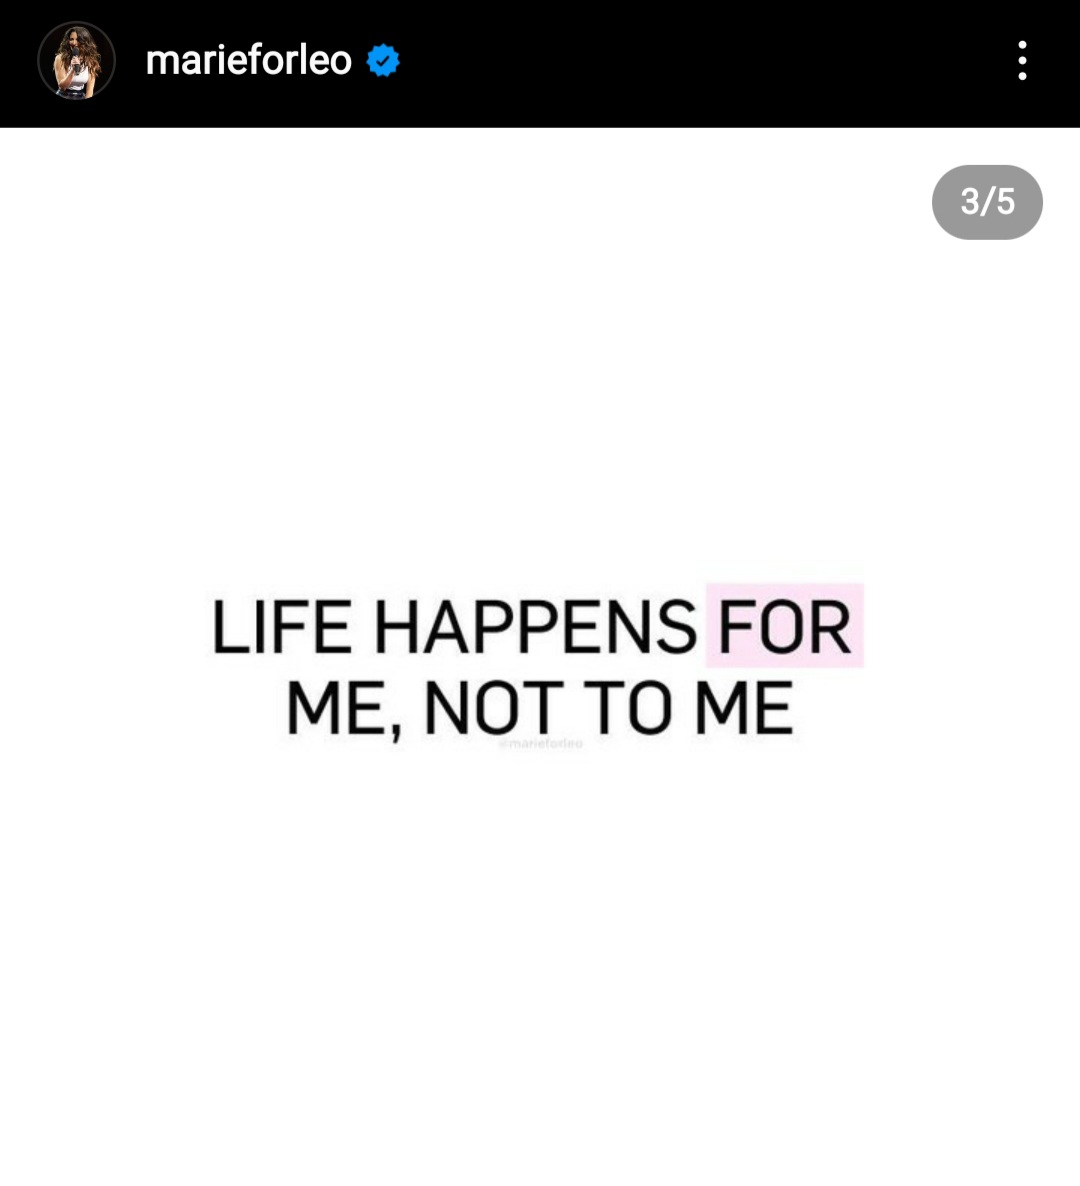 Life happens for me, not to me. Marie Forleo, coaching tip